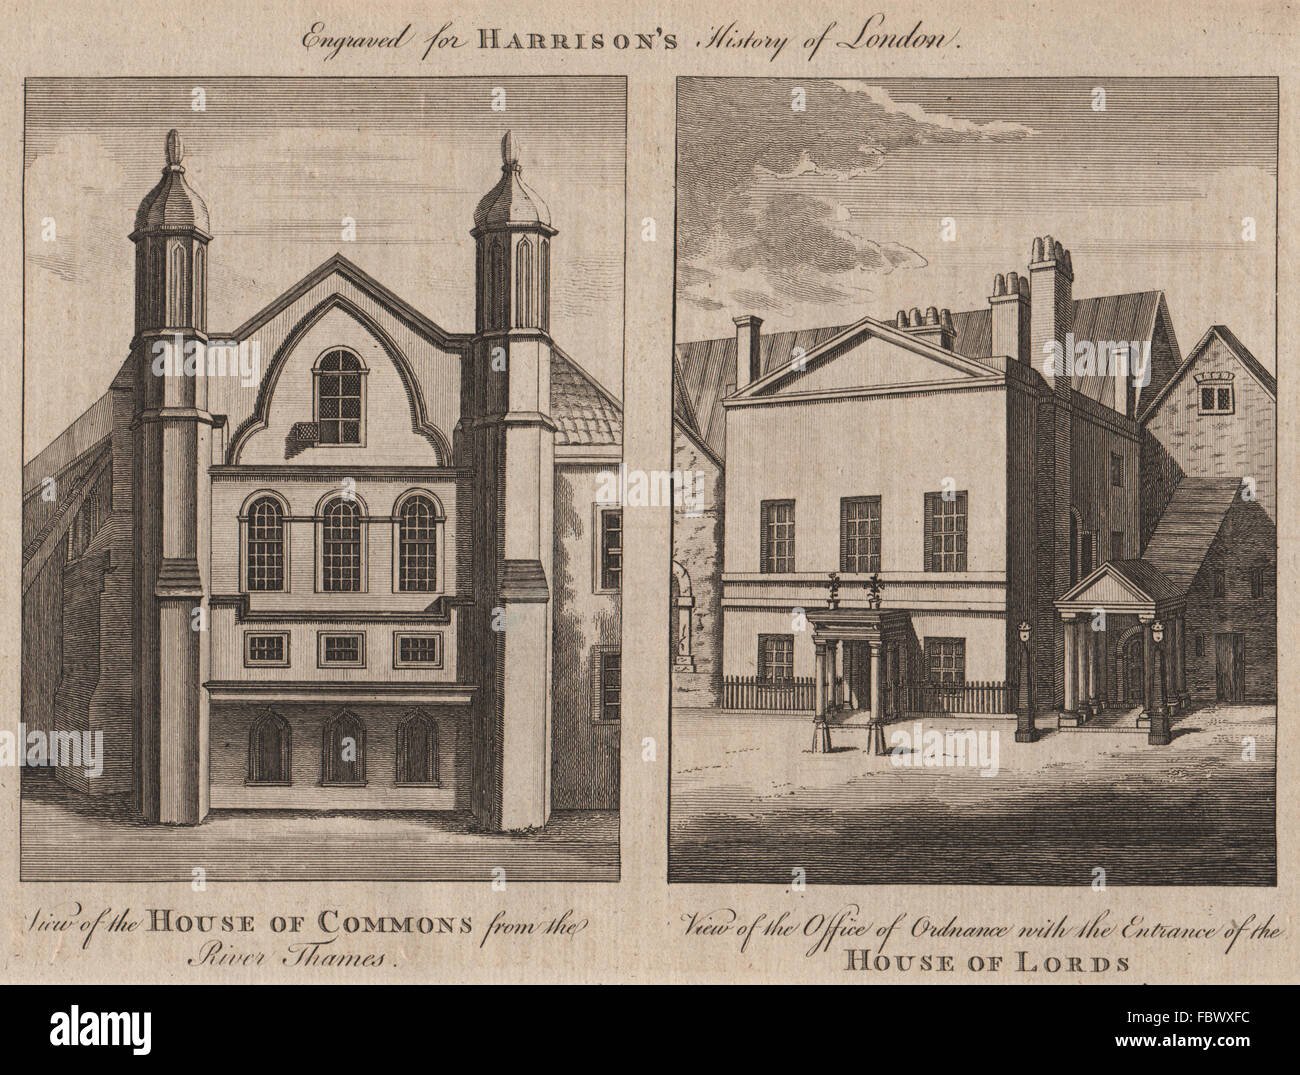 WESTMINSTER. House of Commons. Ordnance Office. House of Lords. HARRISON, 1775 Stock Photo